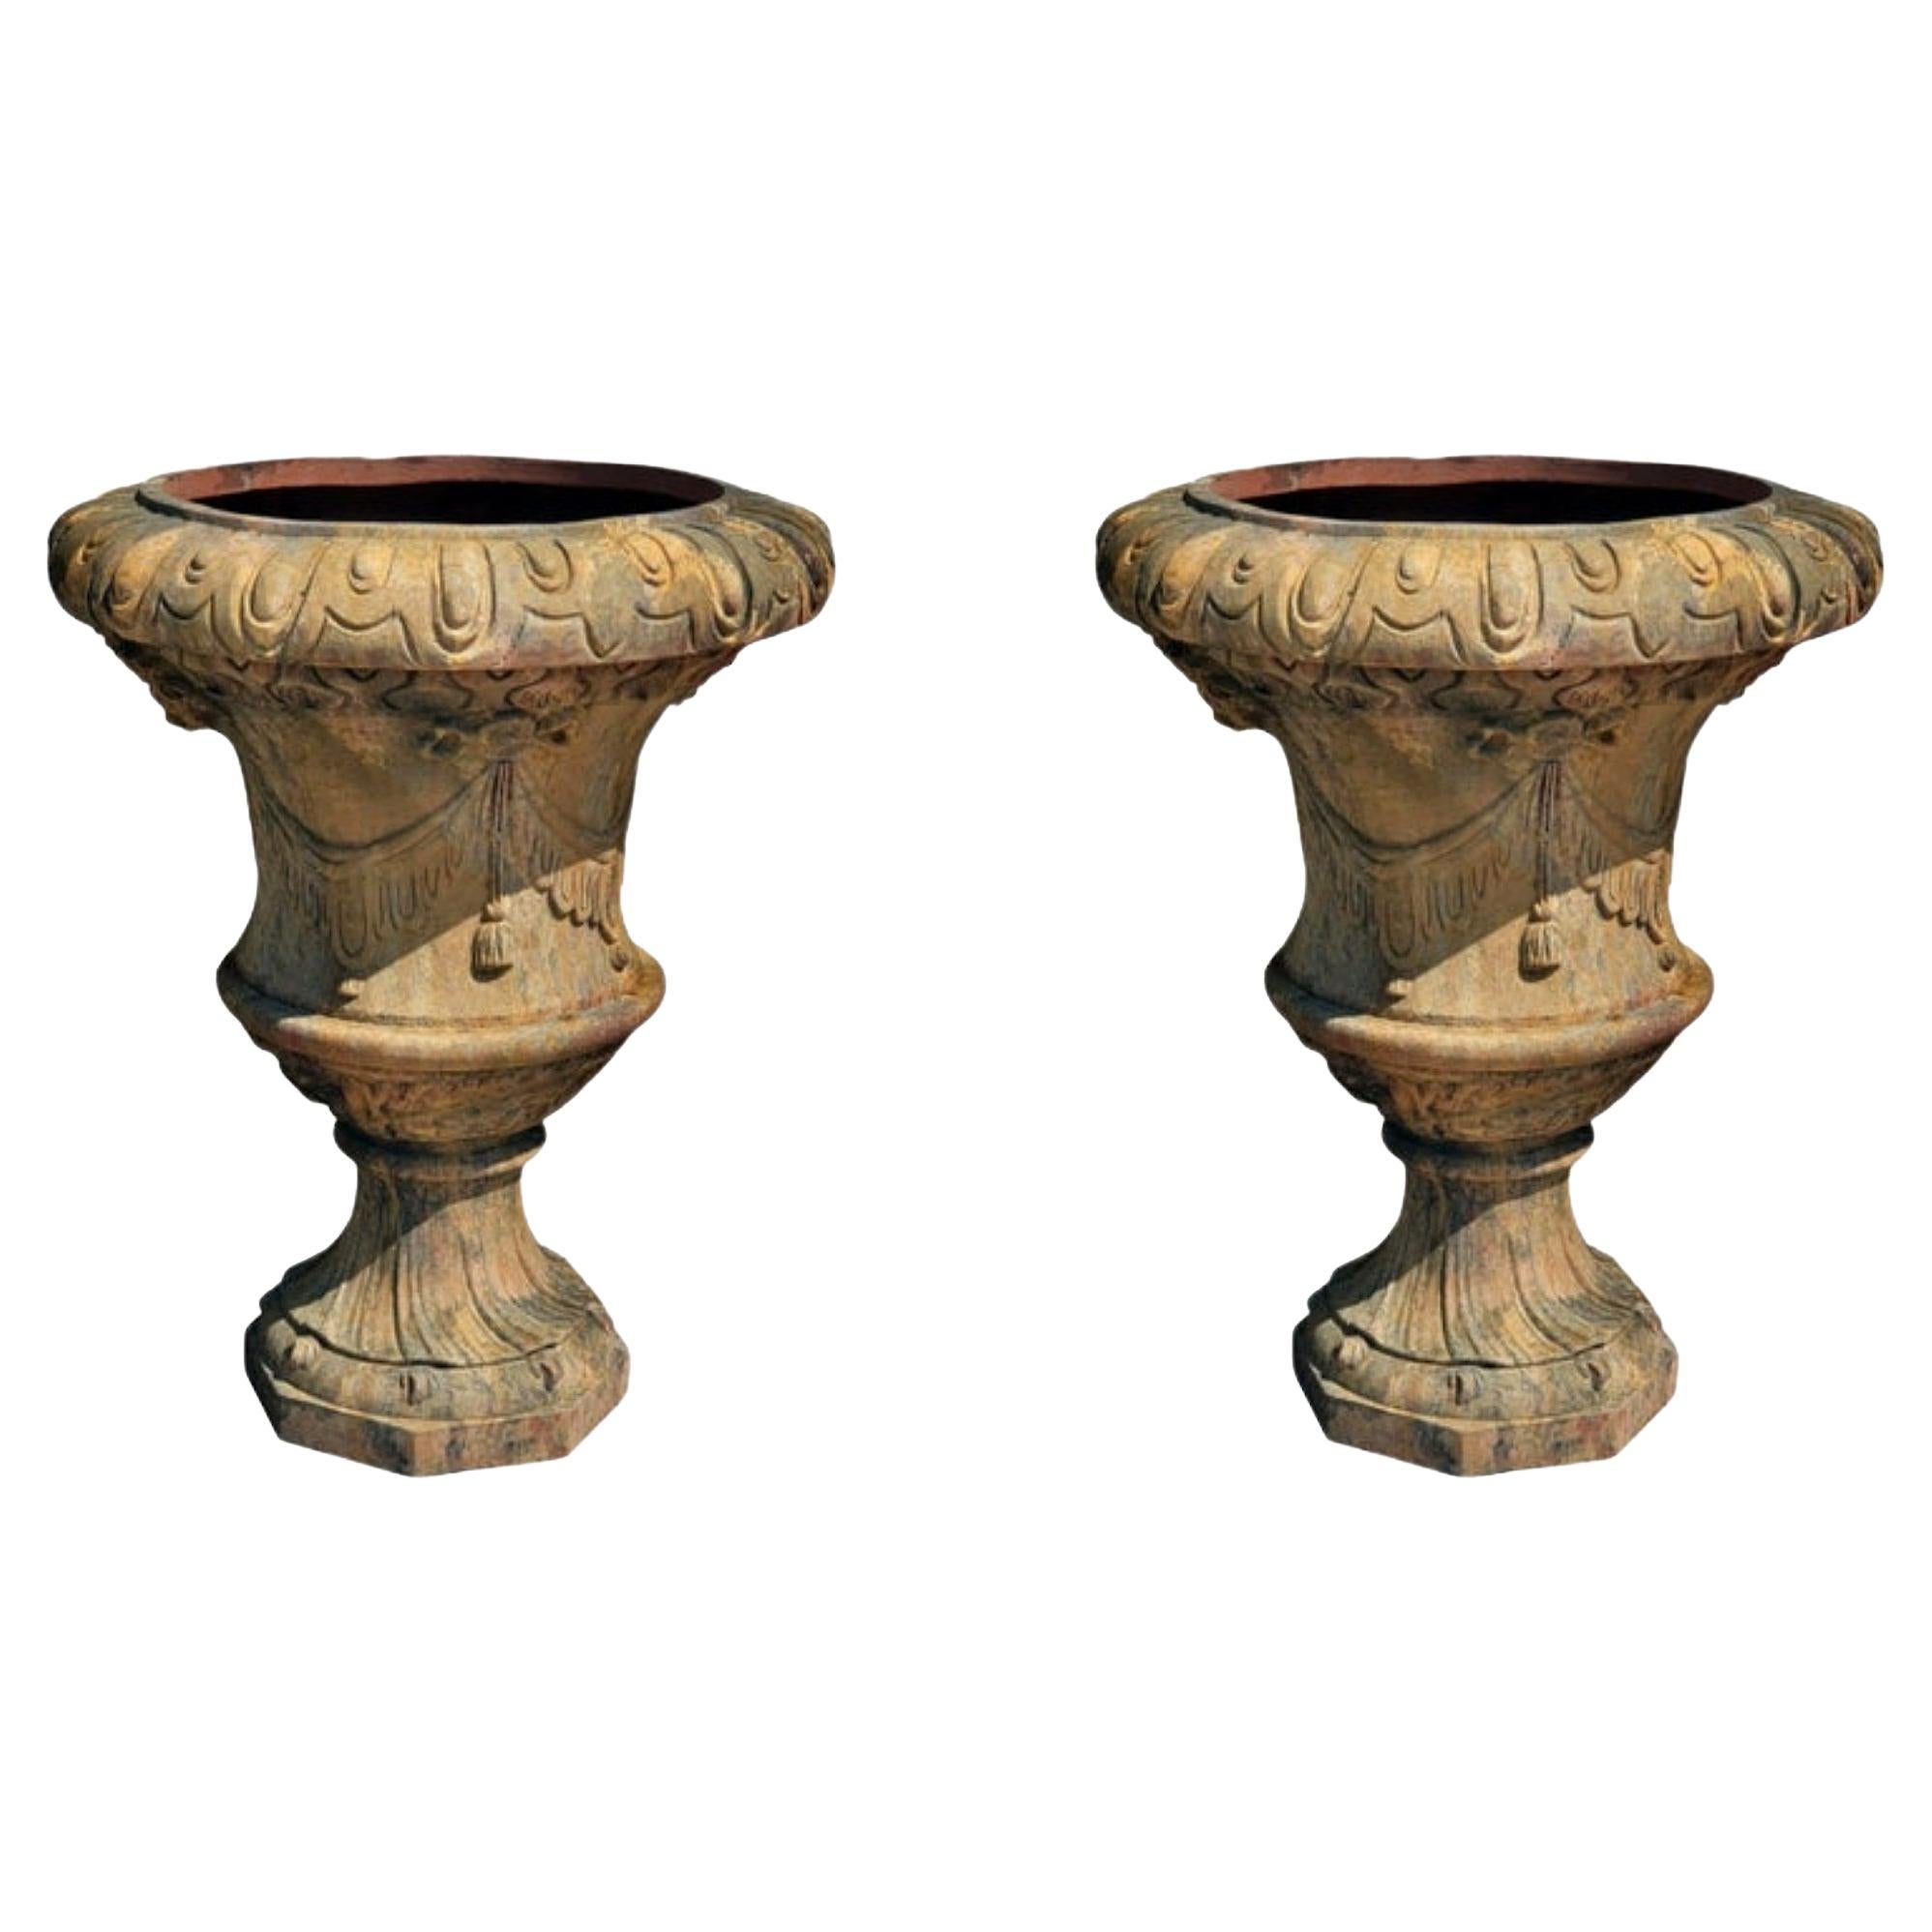 Pair of Large Florentine Ornamental Vases in Terracotta Early 20th Century For Sale